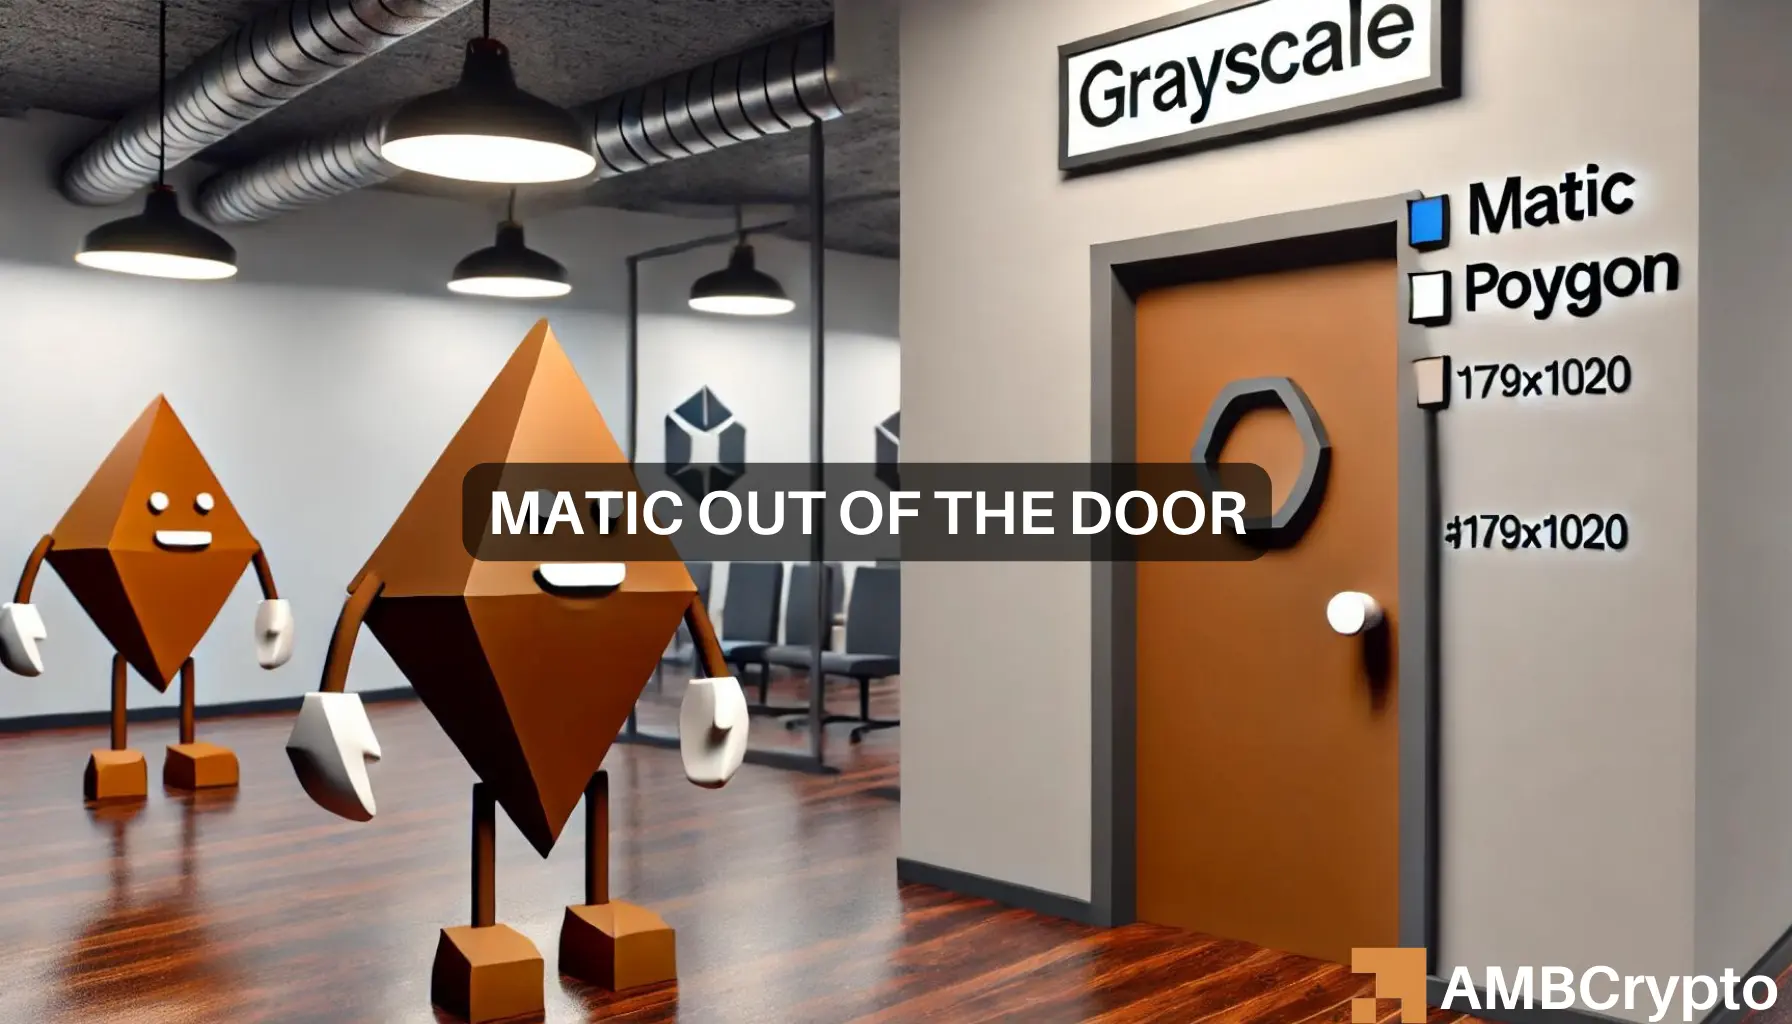 What MATIC’s exclusion from a Grayscale fund might mean for its price